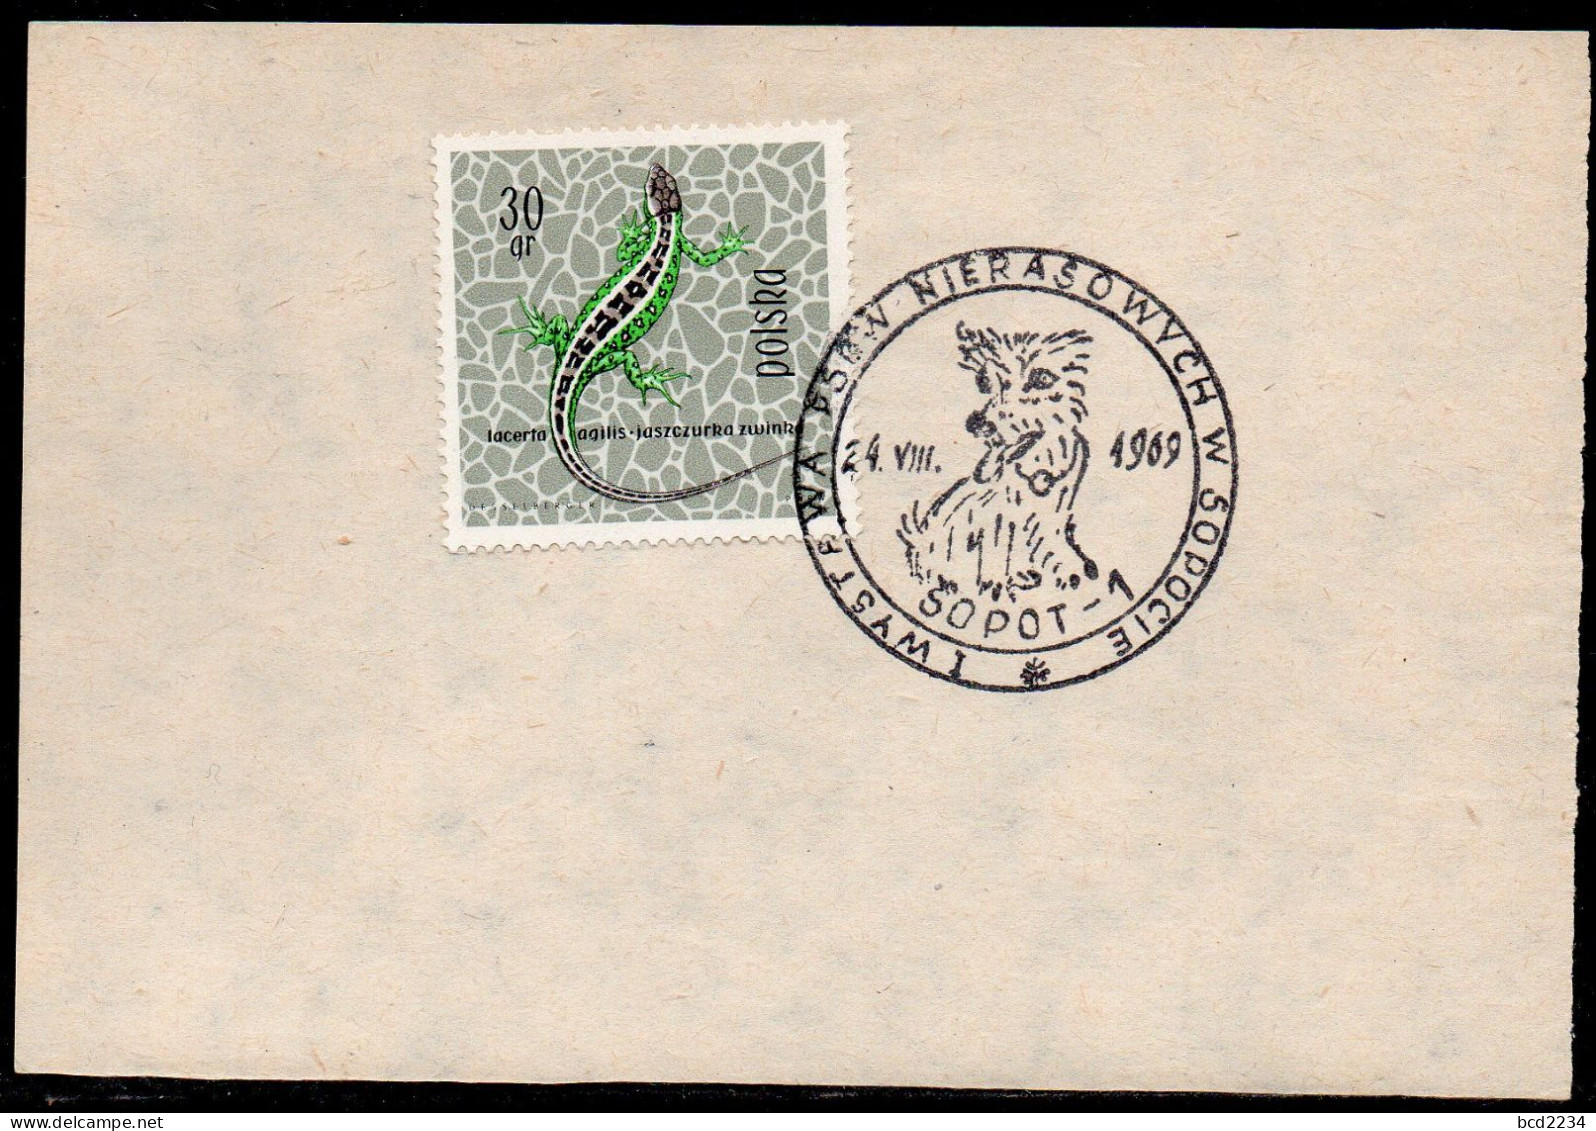 POLAND 1969 I NON-PEDIGREE DOG SHOW SOPOT SPECIAL CANCEL ON PAPER DOGS - Chiens